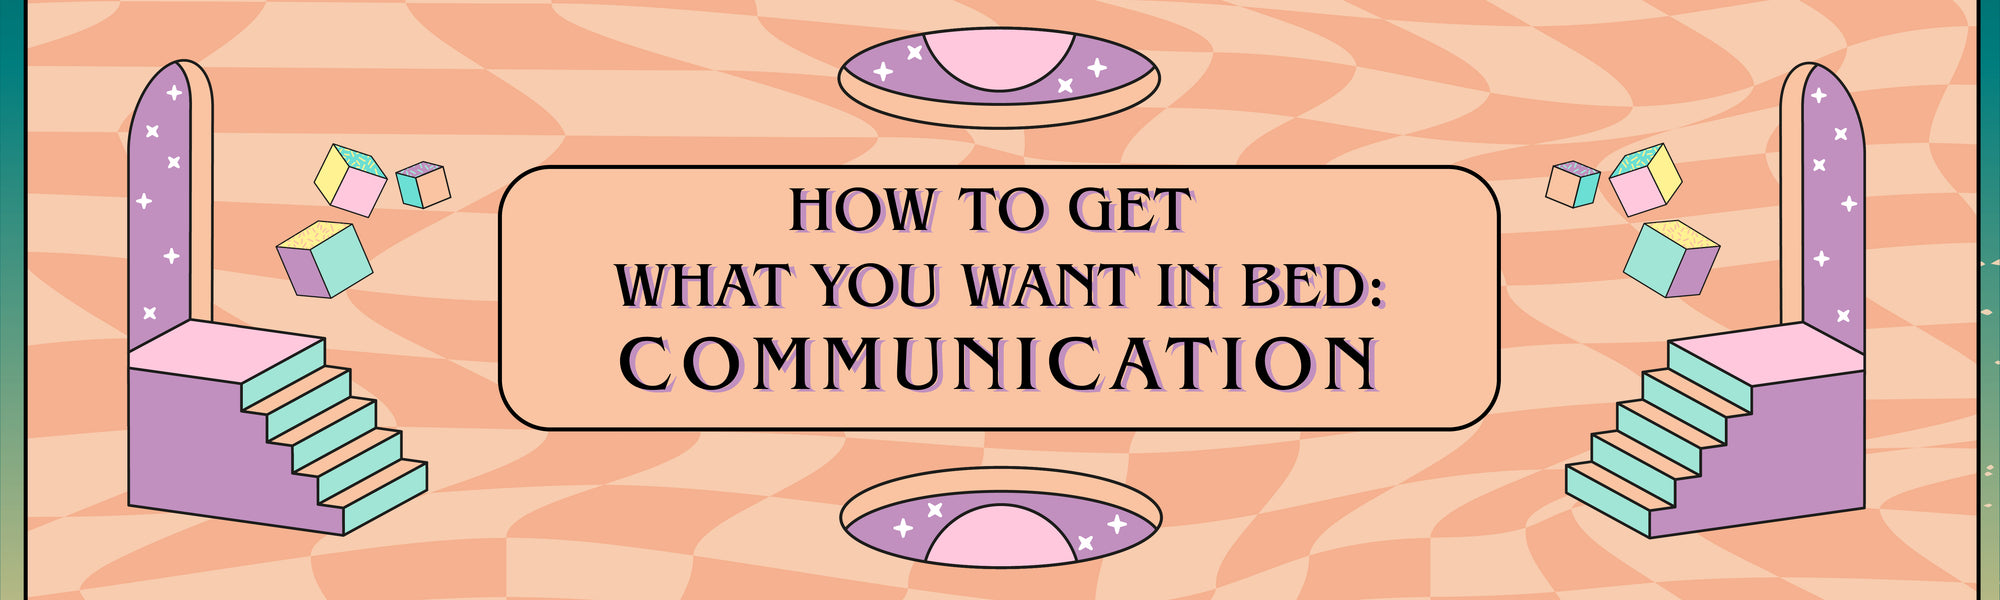 How to get what you want in bed: Communication